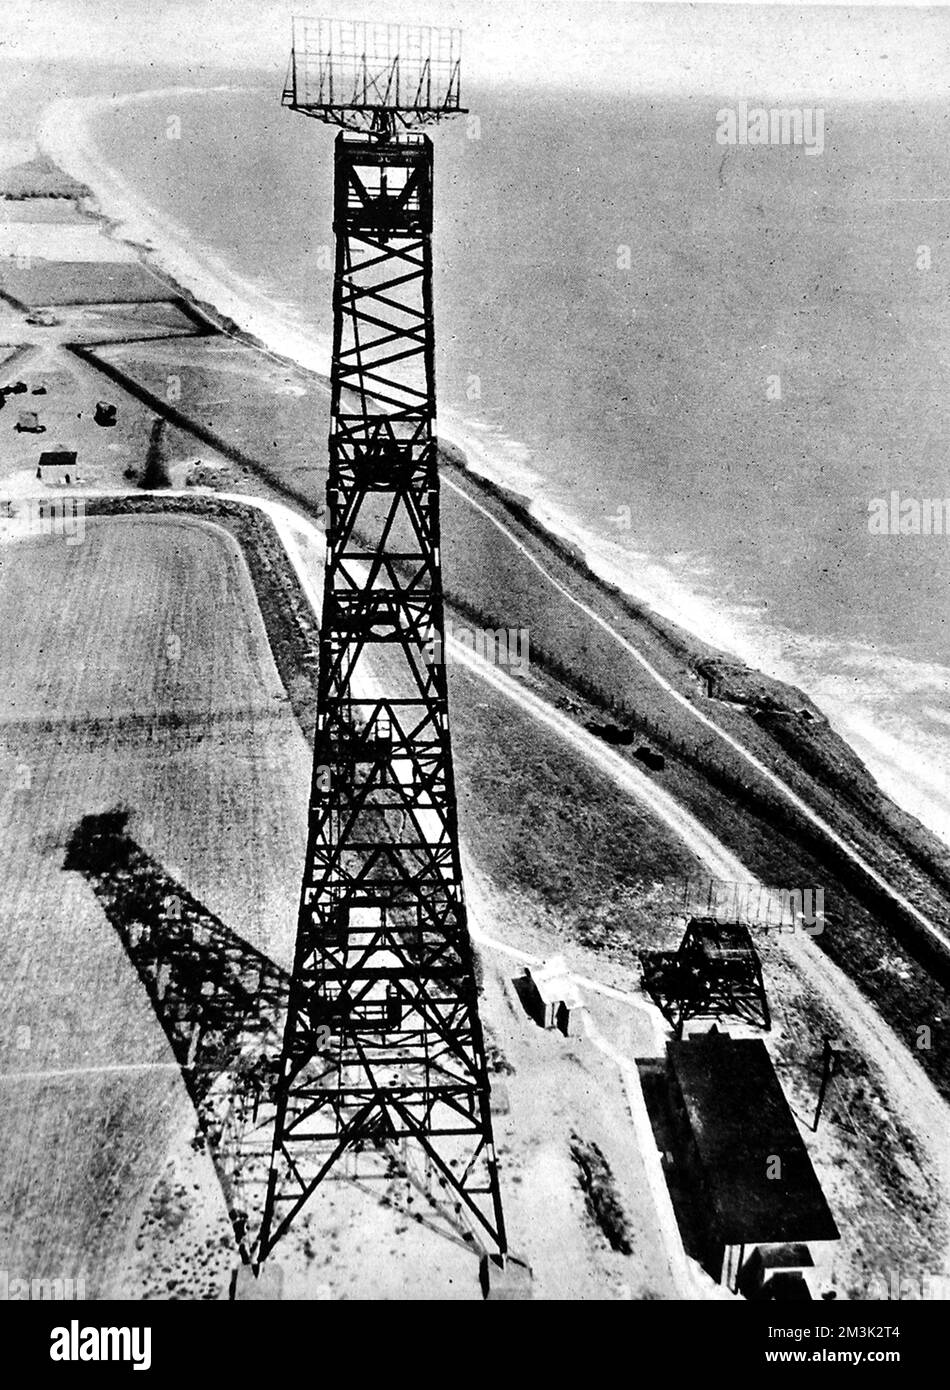 A 'Chain Home Low' radar station on the coast of Britain, during the Second World War, c.1945.     Date: 1945 Stock Photo